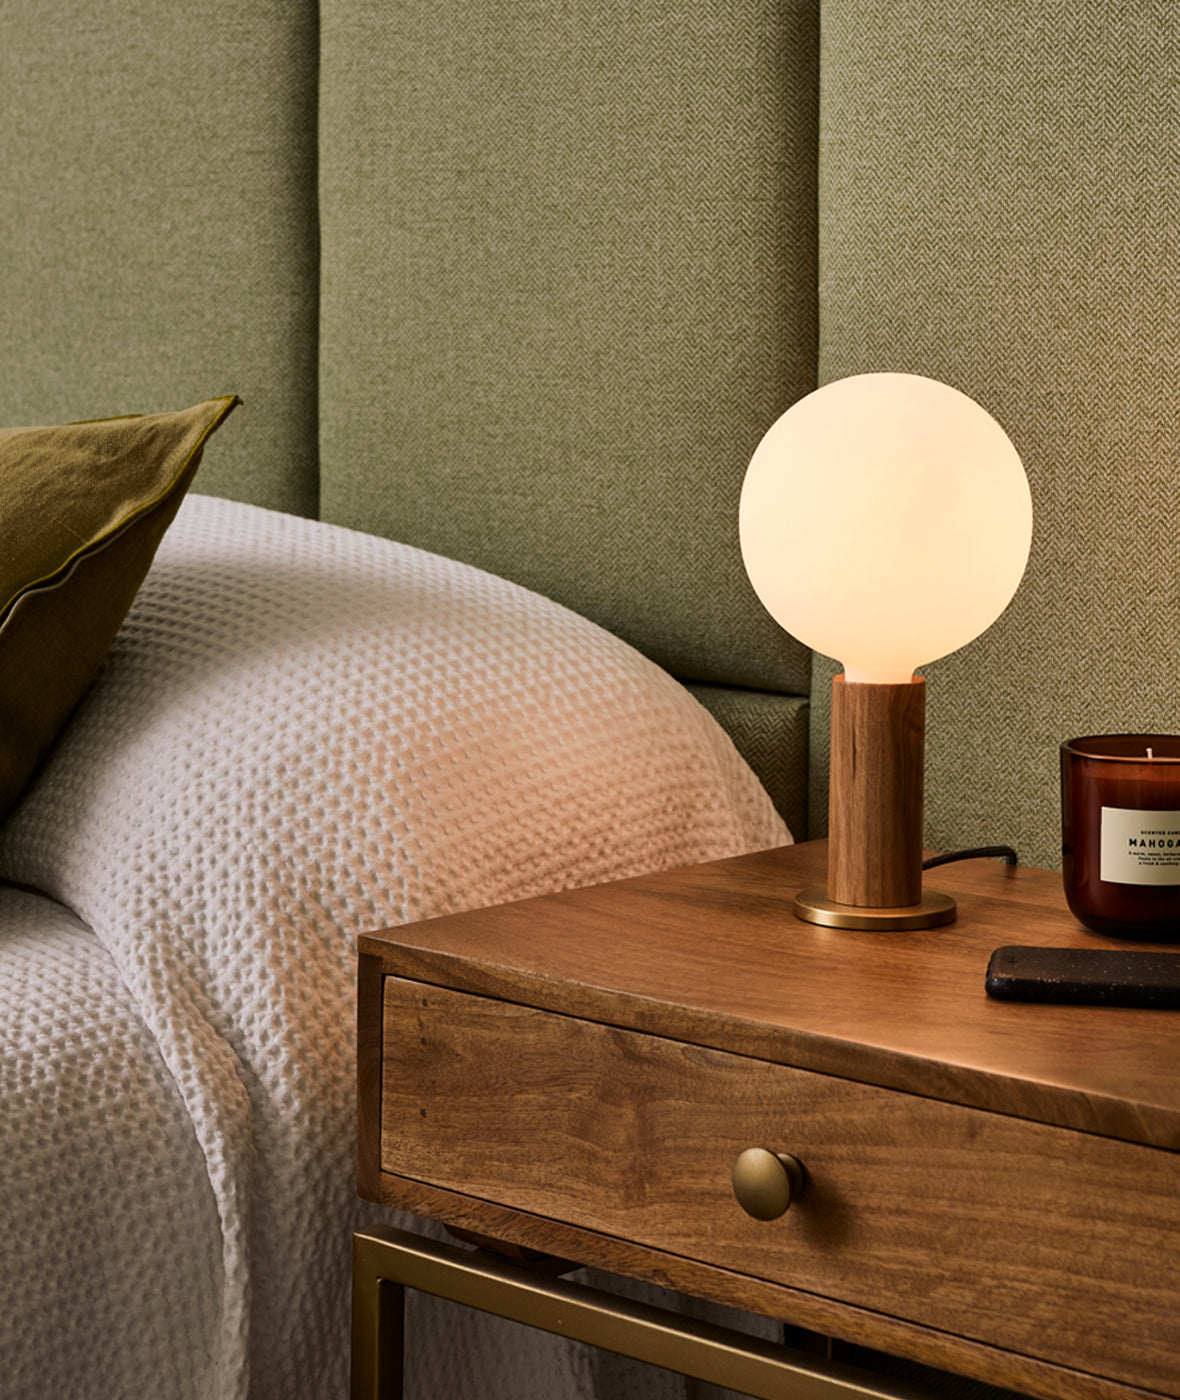 Knuckle Table Lamp - More Options